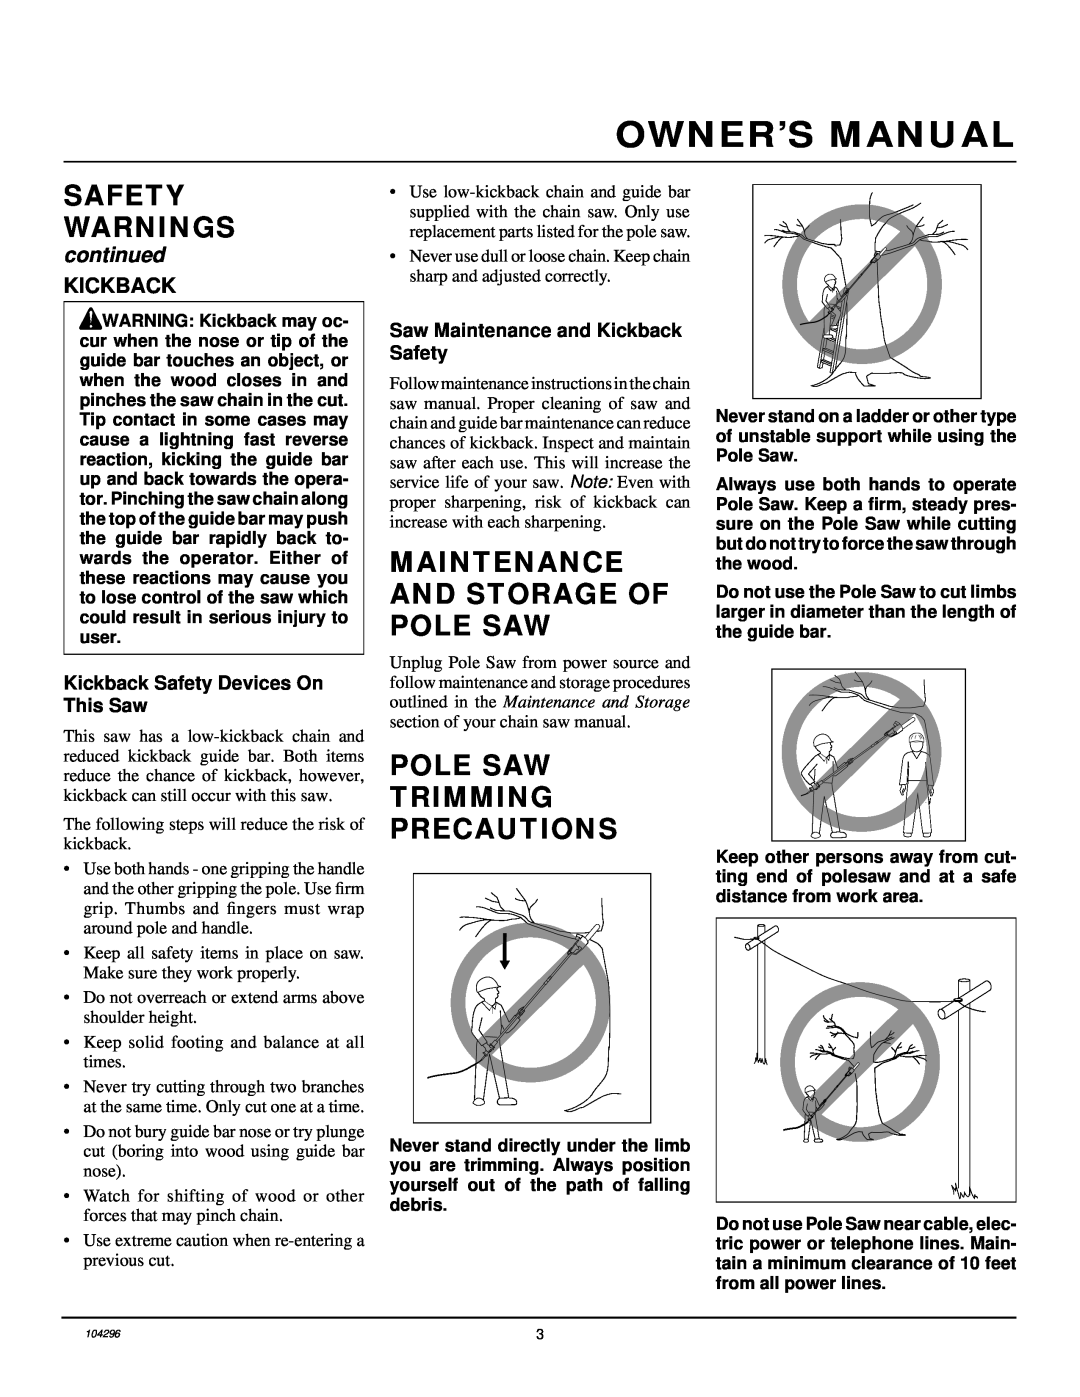 Remington RPS 96 Owner’S Manual, Maintenance And Storage Of Pole Saw, Pole Saw Trimming Precautions, continued, Kickback 